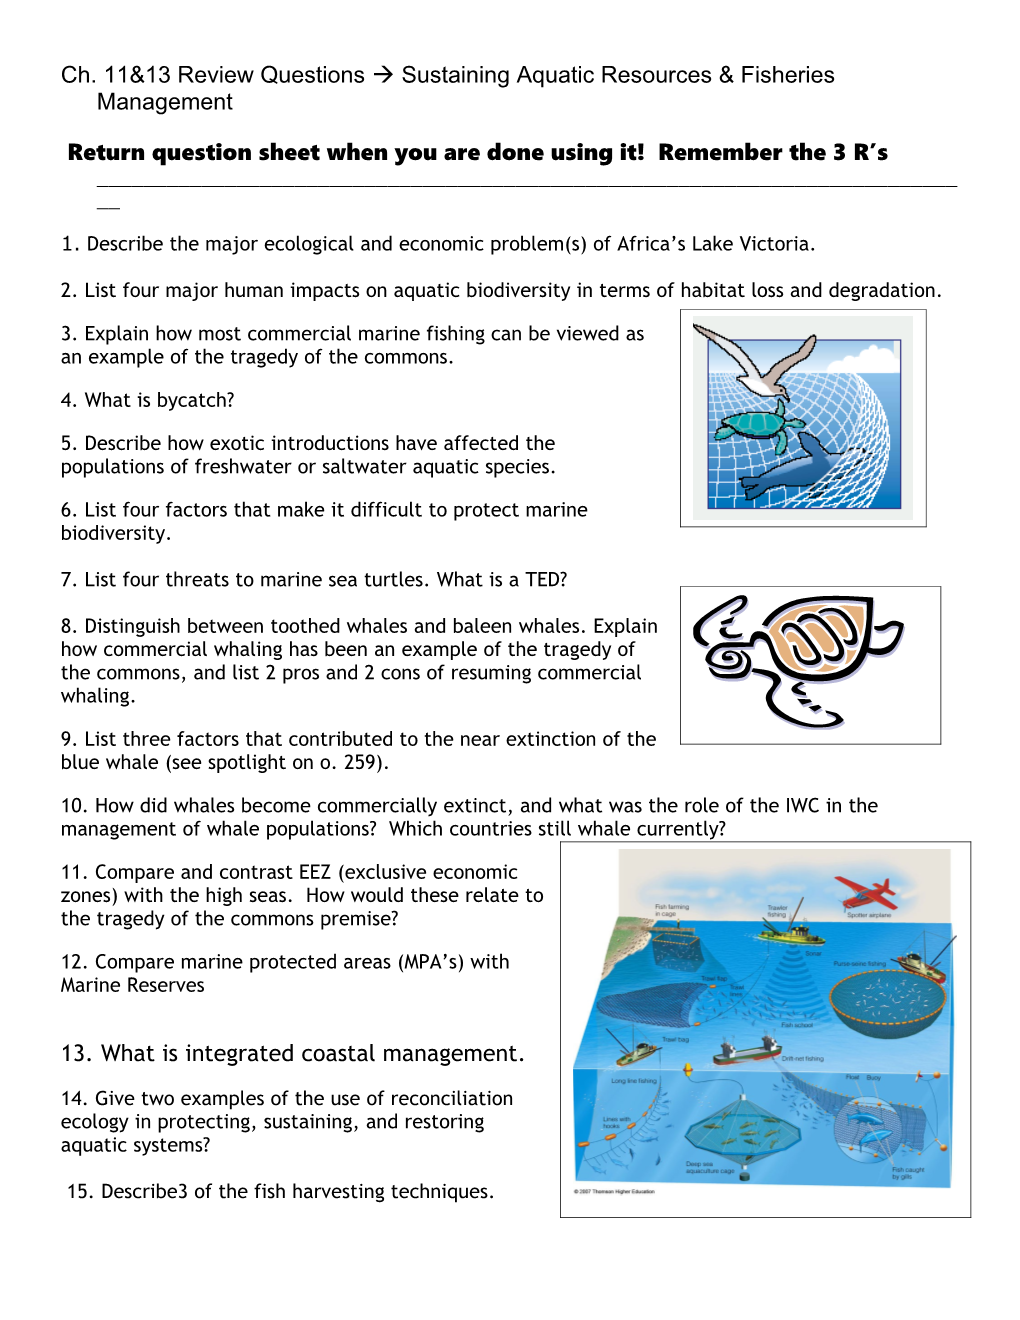 Ch. 11&13 Review Questions Sustaining Aquatic Resources & Fisheries Management